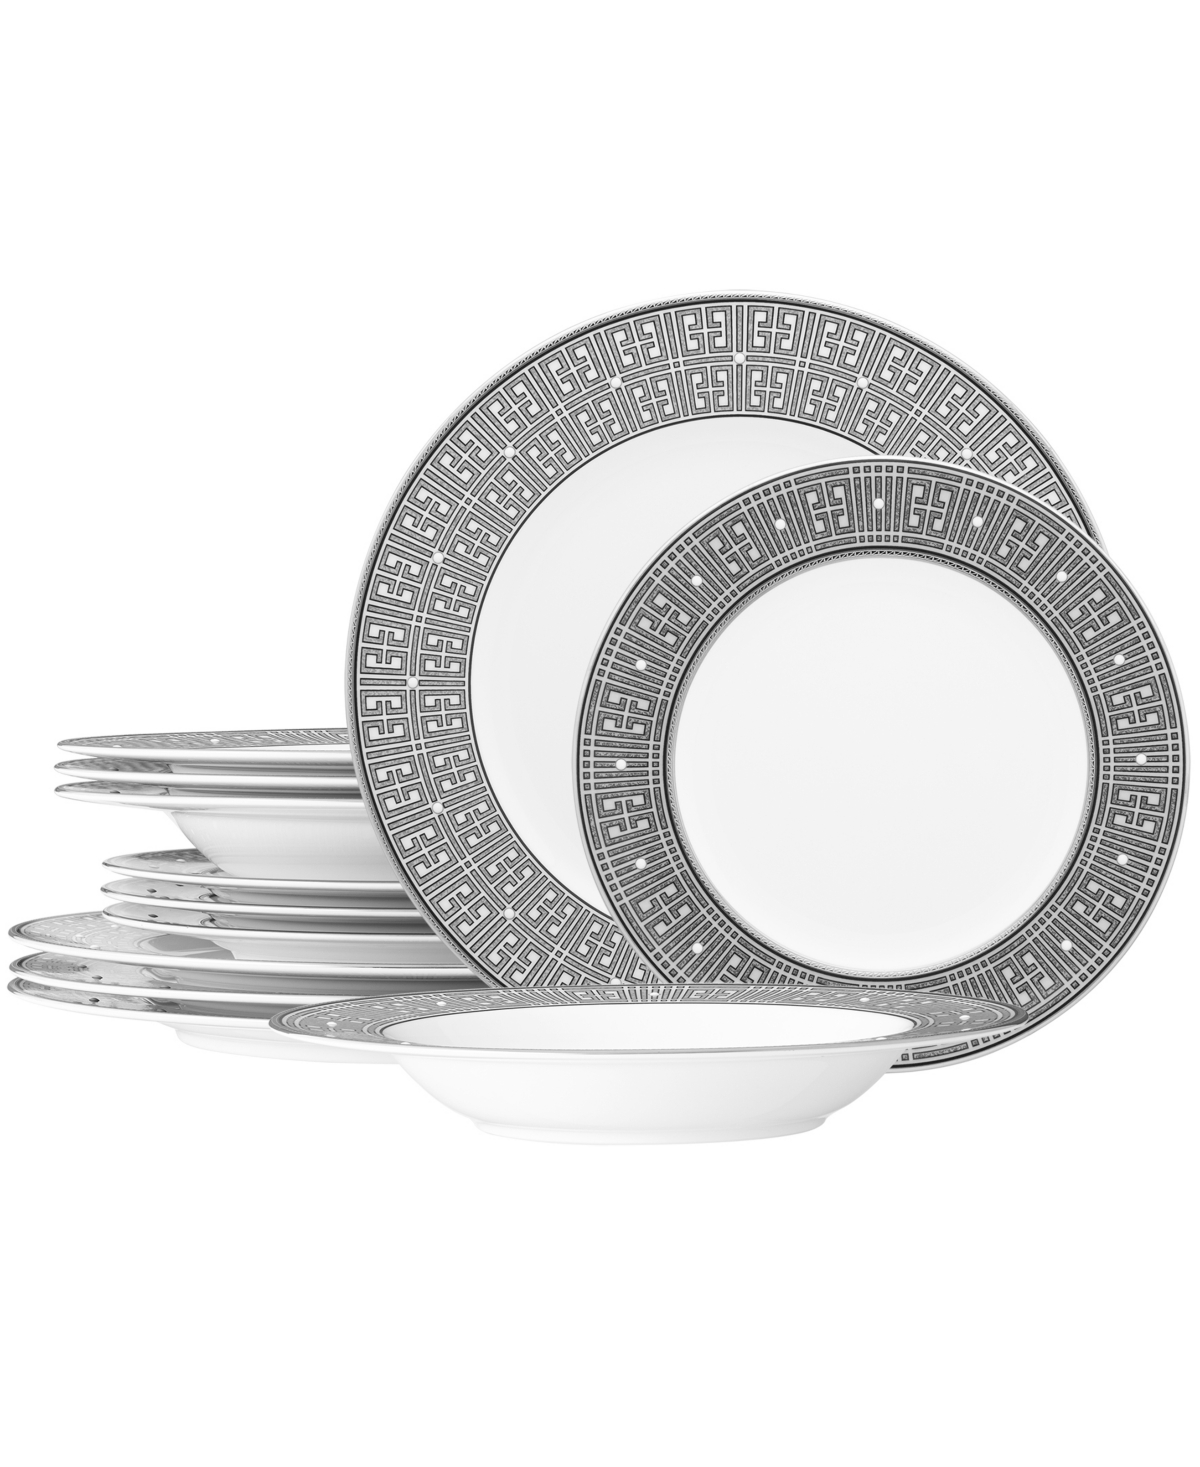 Noritake Infinity 12 Piece Set, Service For 4 In Graphite